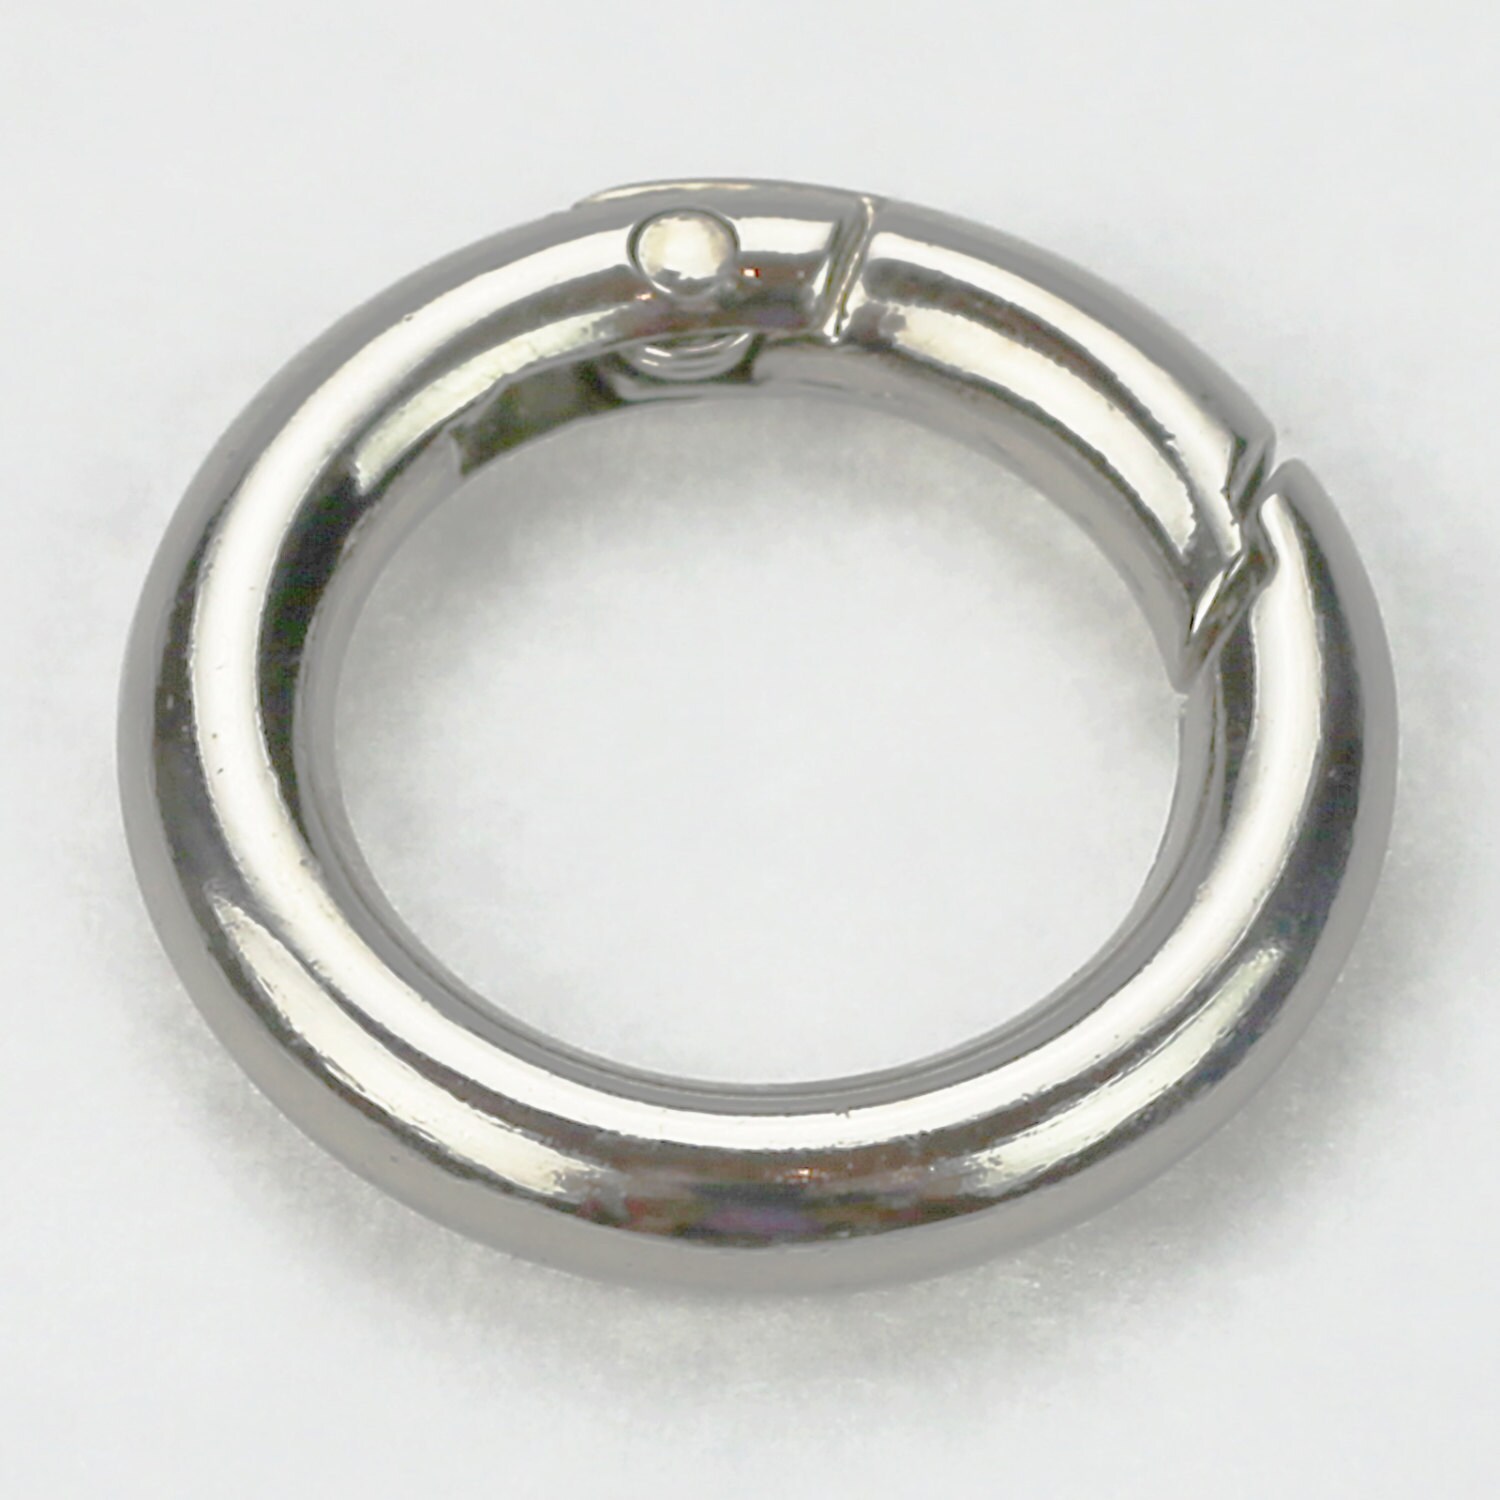 Buy Silver Spring Gate Rings,1/2''13mm Small Round Spring O Ring